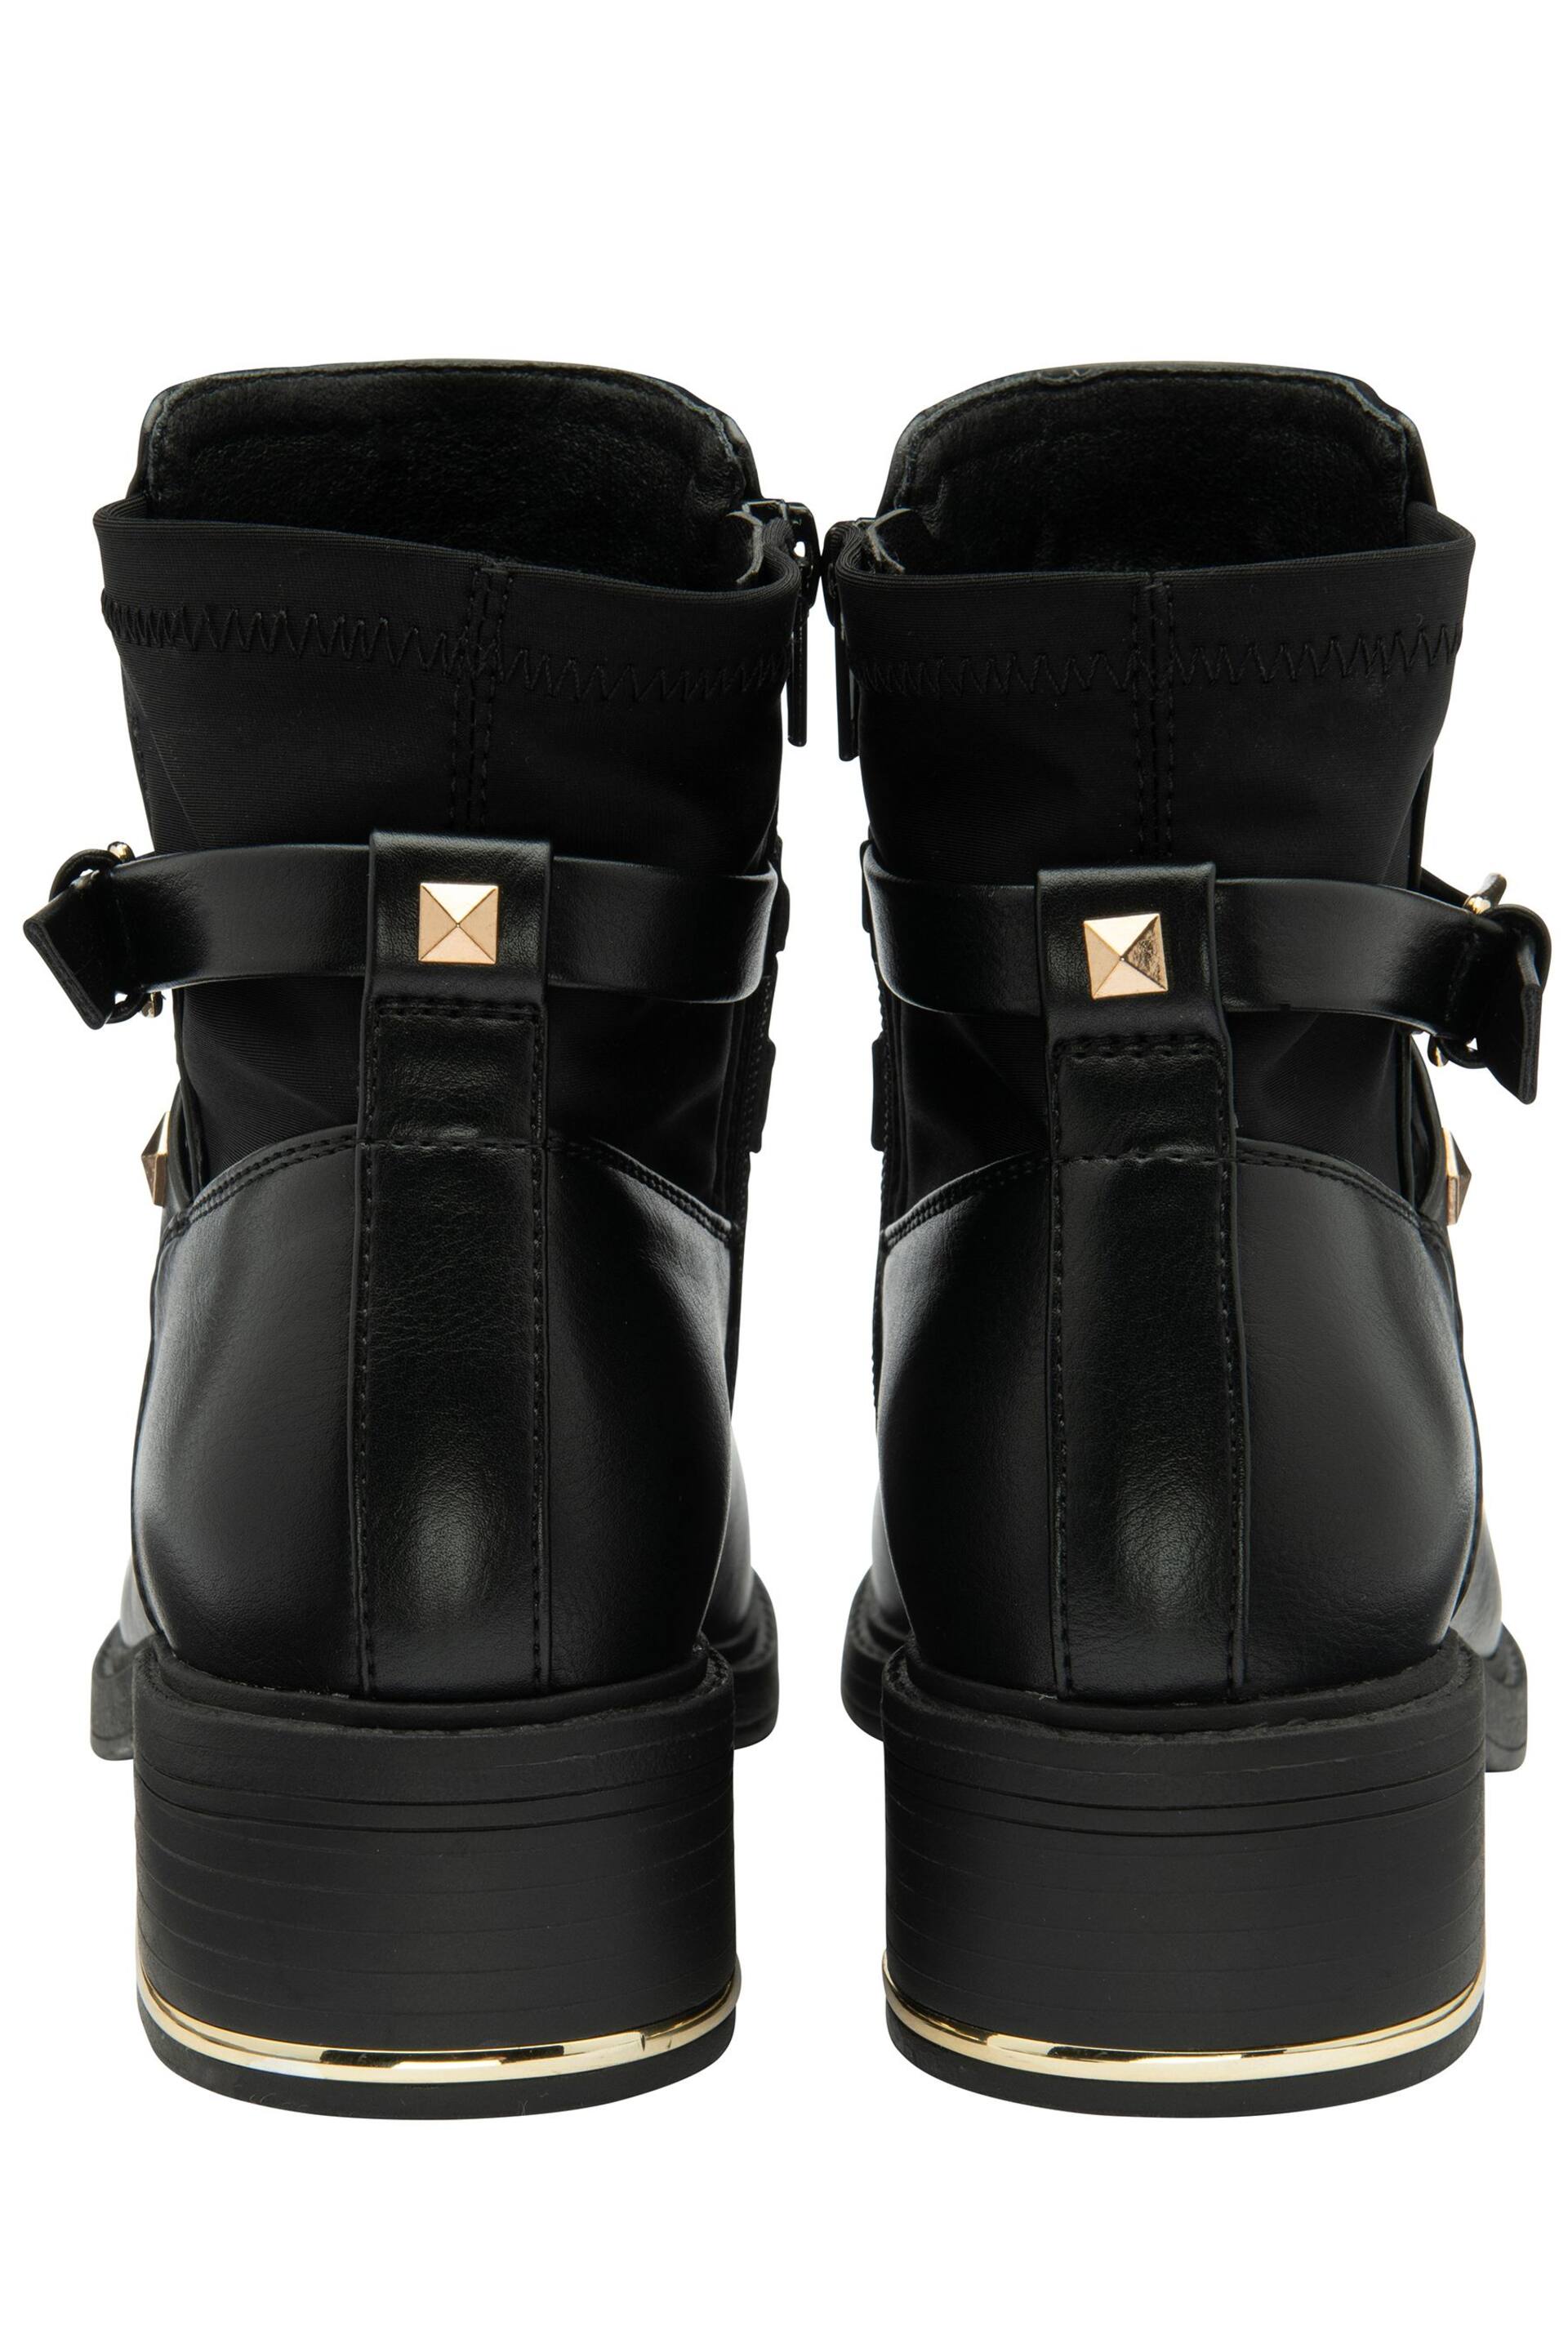 Lotus Black Olive Ankle Boots - Image 3 of 4